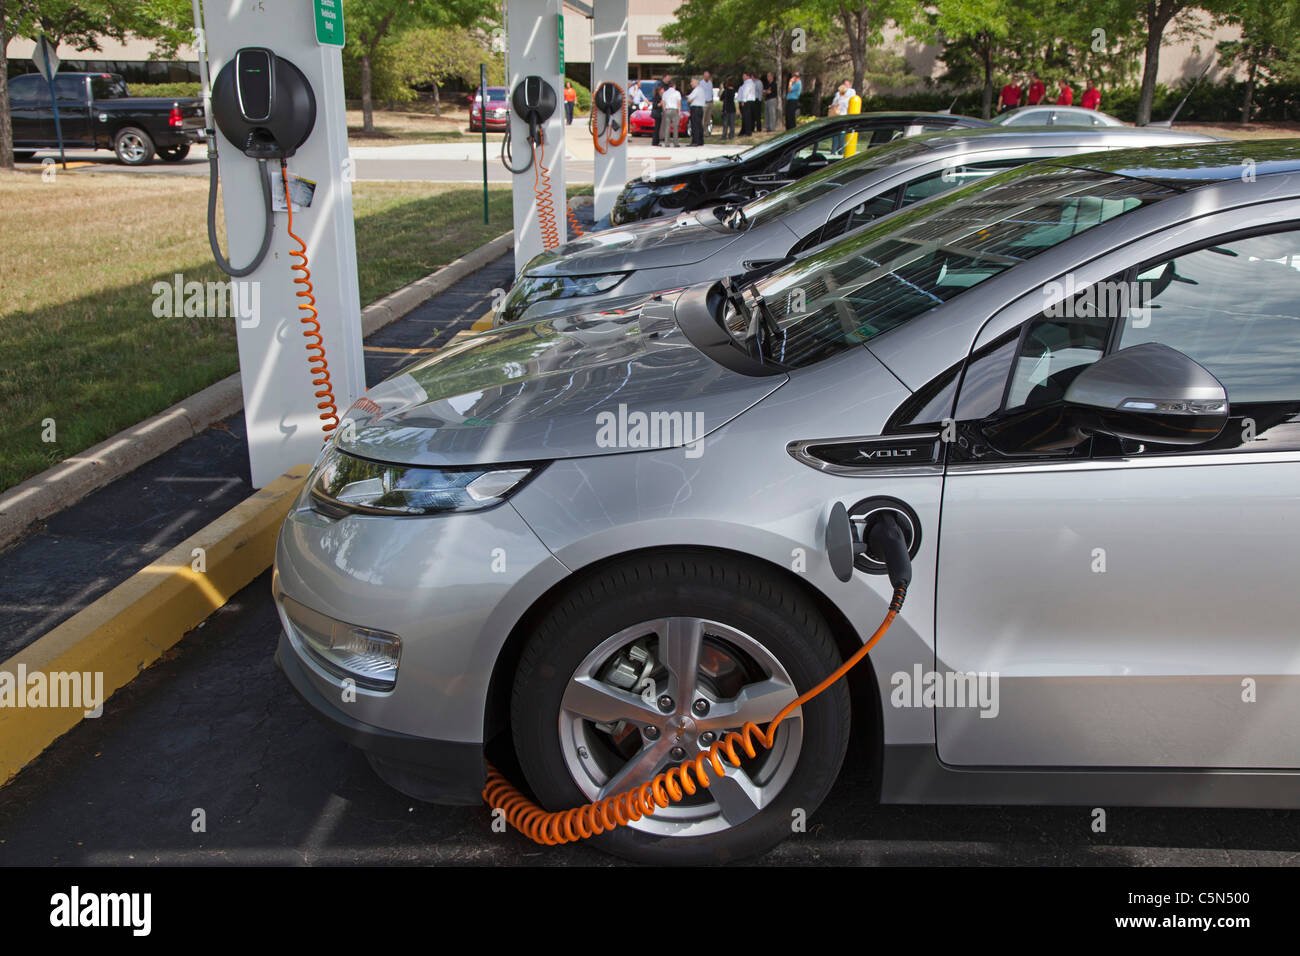 Chevrolet Volt Plug-In Electric Car at Charging Station Stock Photo